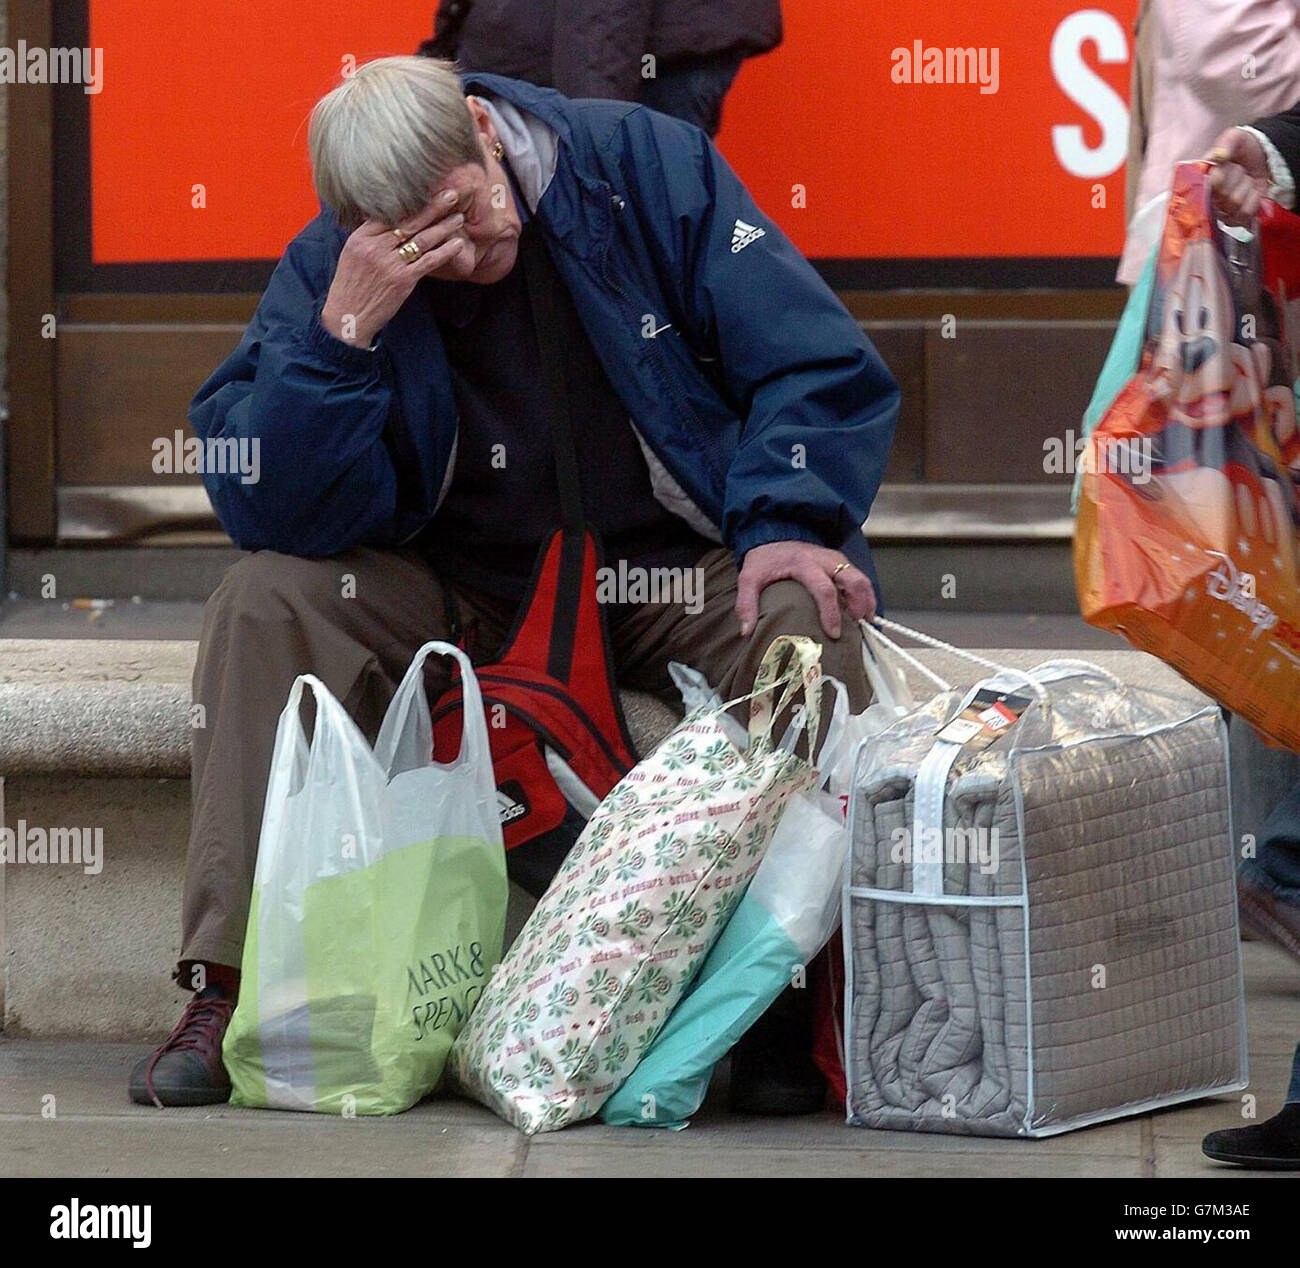 An exhausted shopper takes a break from shopping. Retailers have reported a brisk start to the festive sales period. Stock Photo